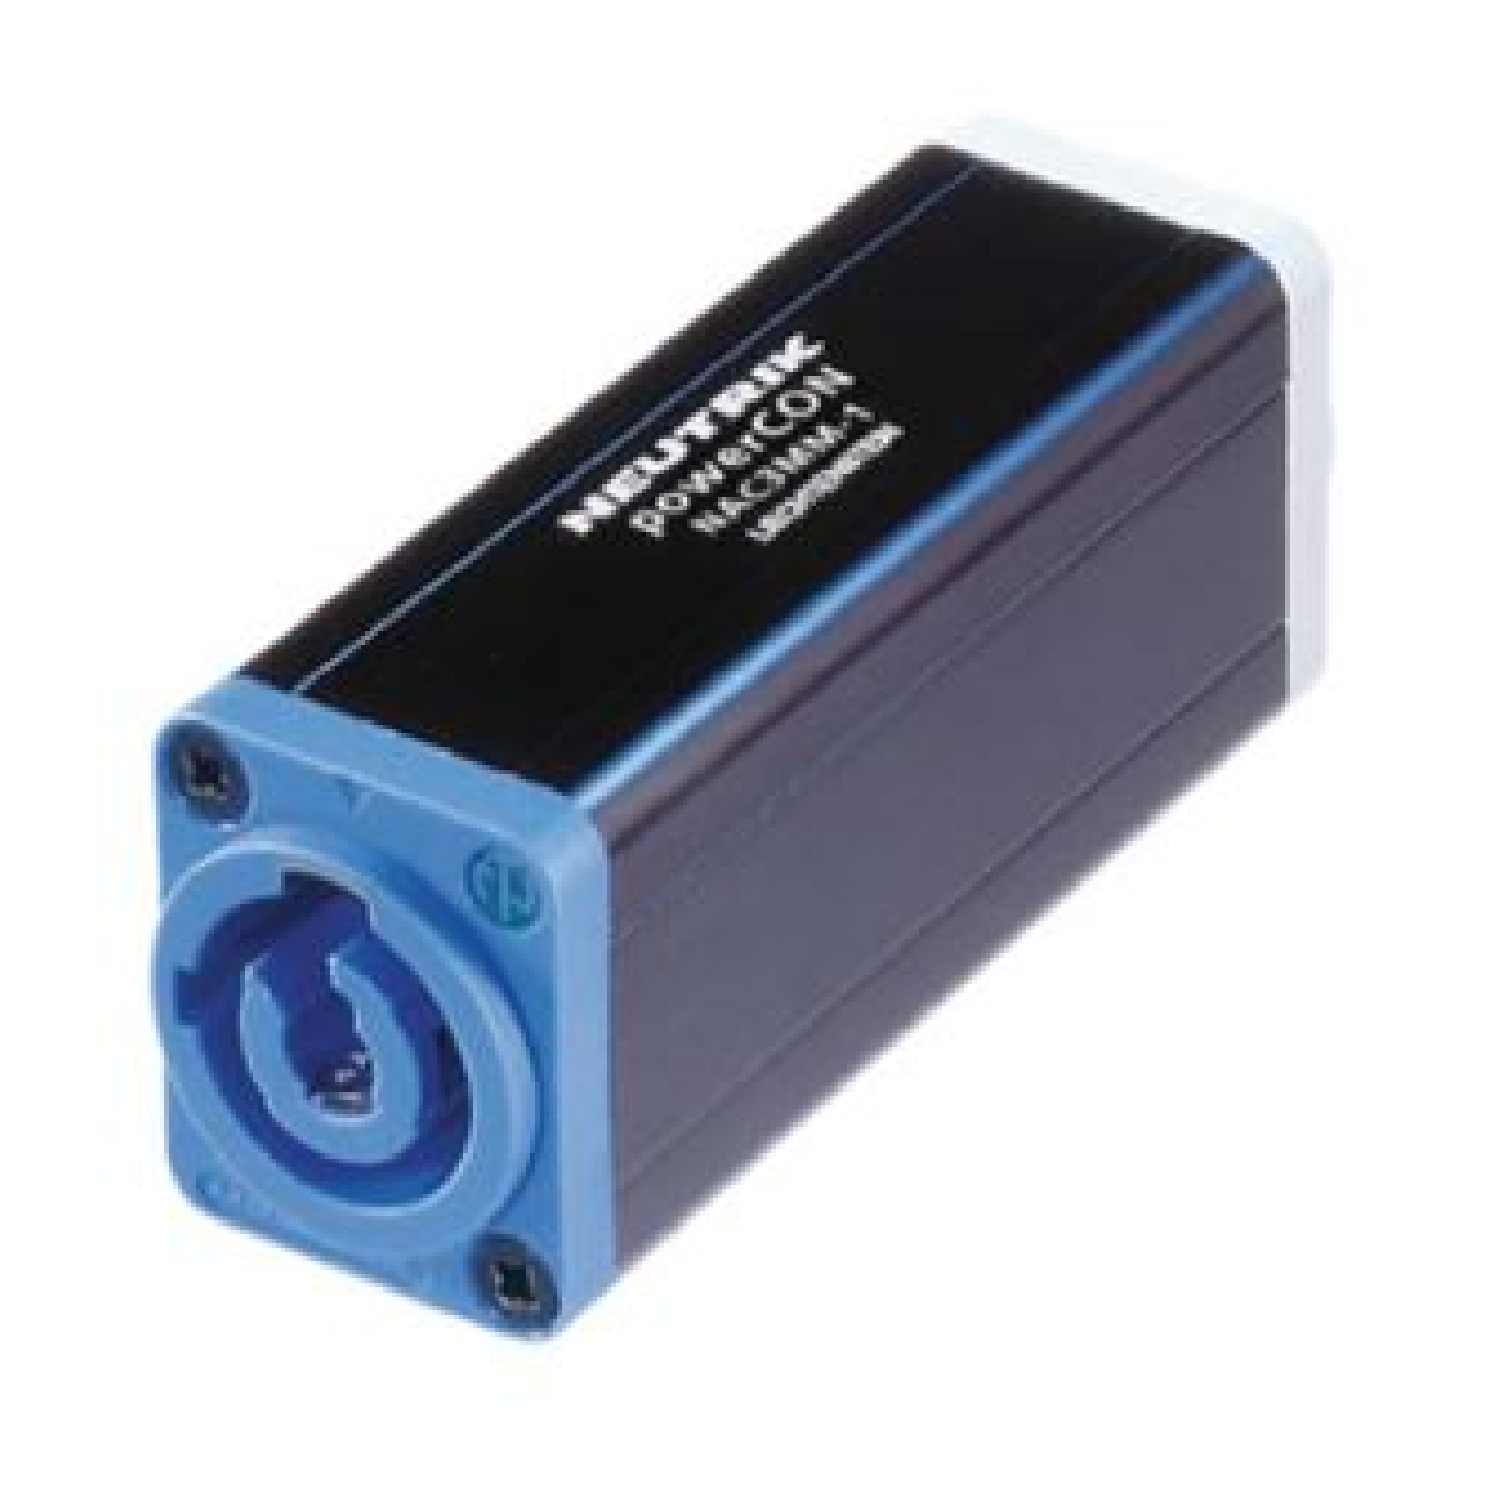 PowerCON NAC3MPA 1 Power in) - PowerCON NAC3MPB-1 (Power Out), Coupler for Linking Cables   NAC3MM neutrik